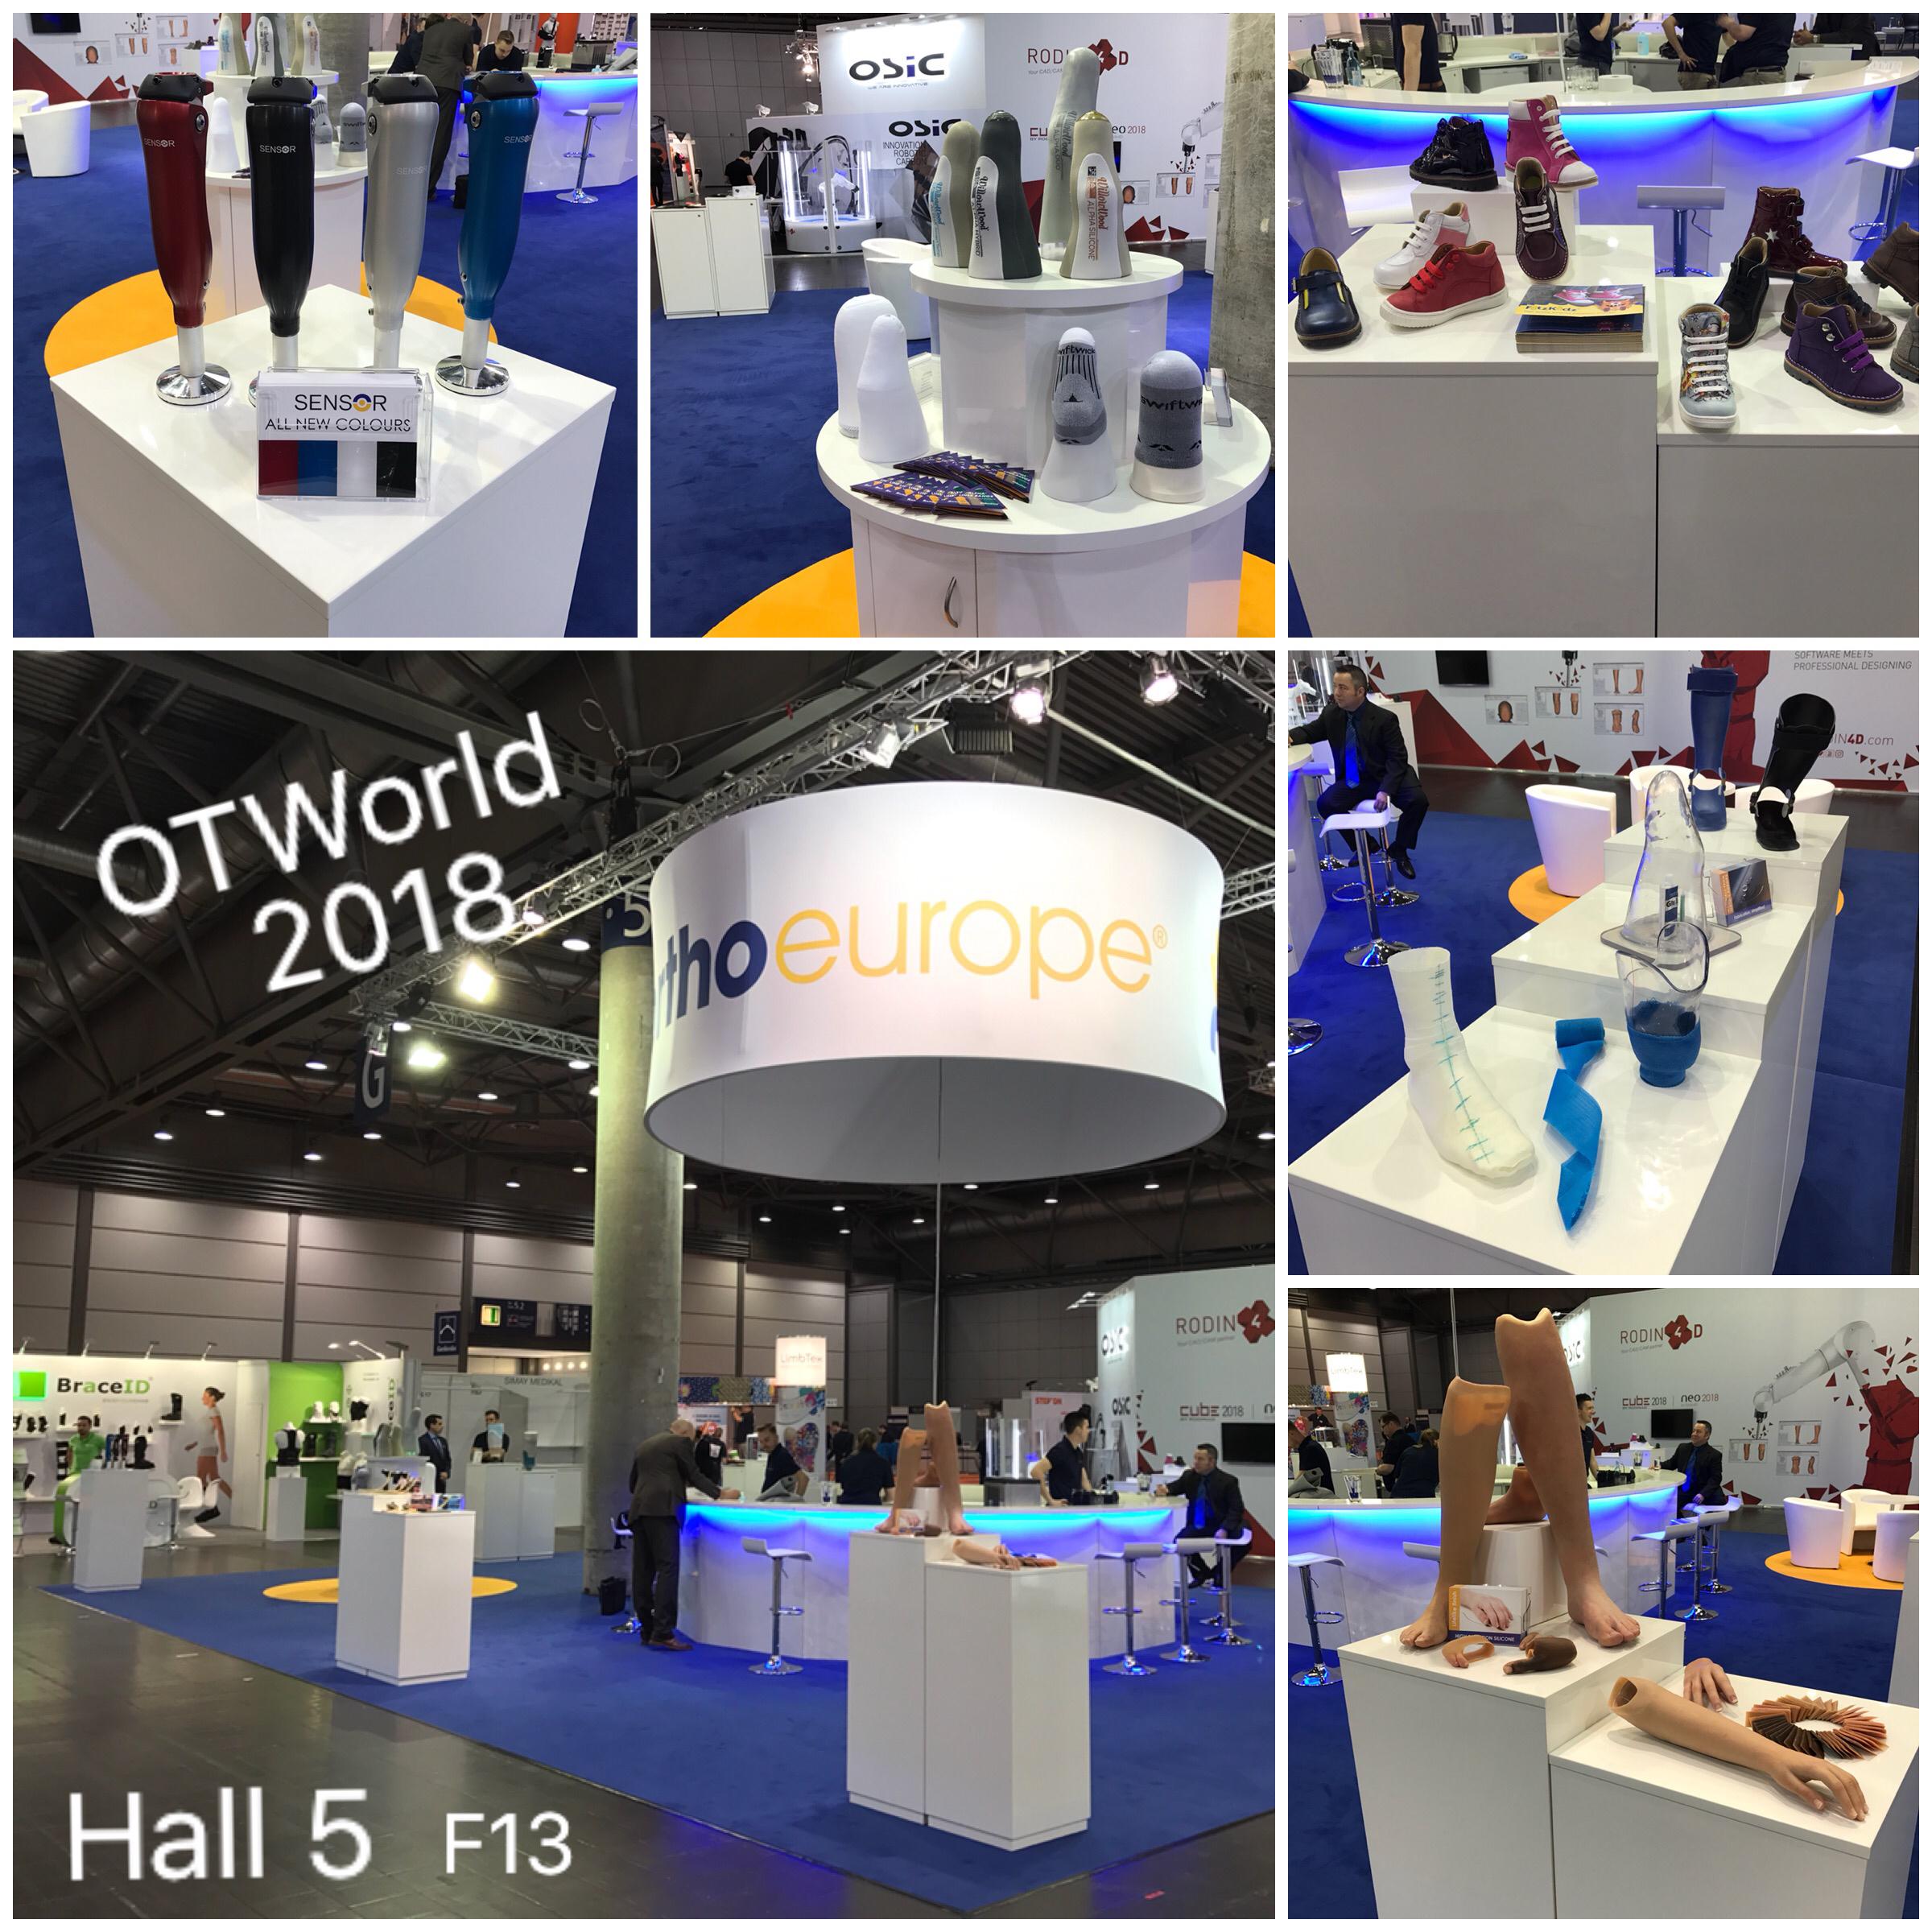 Ability Matters attends OTWorld, Leipzig